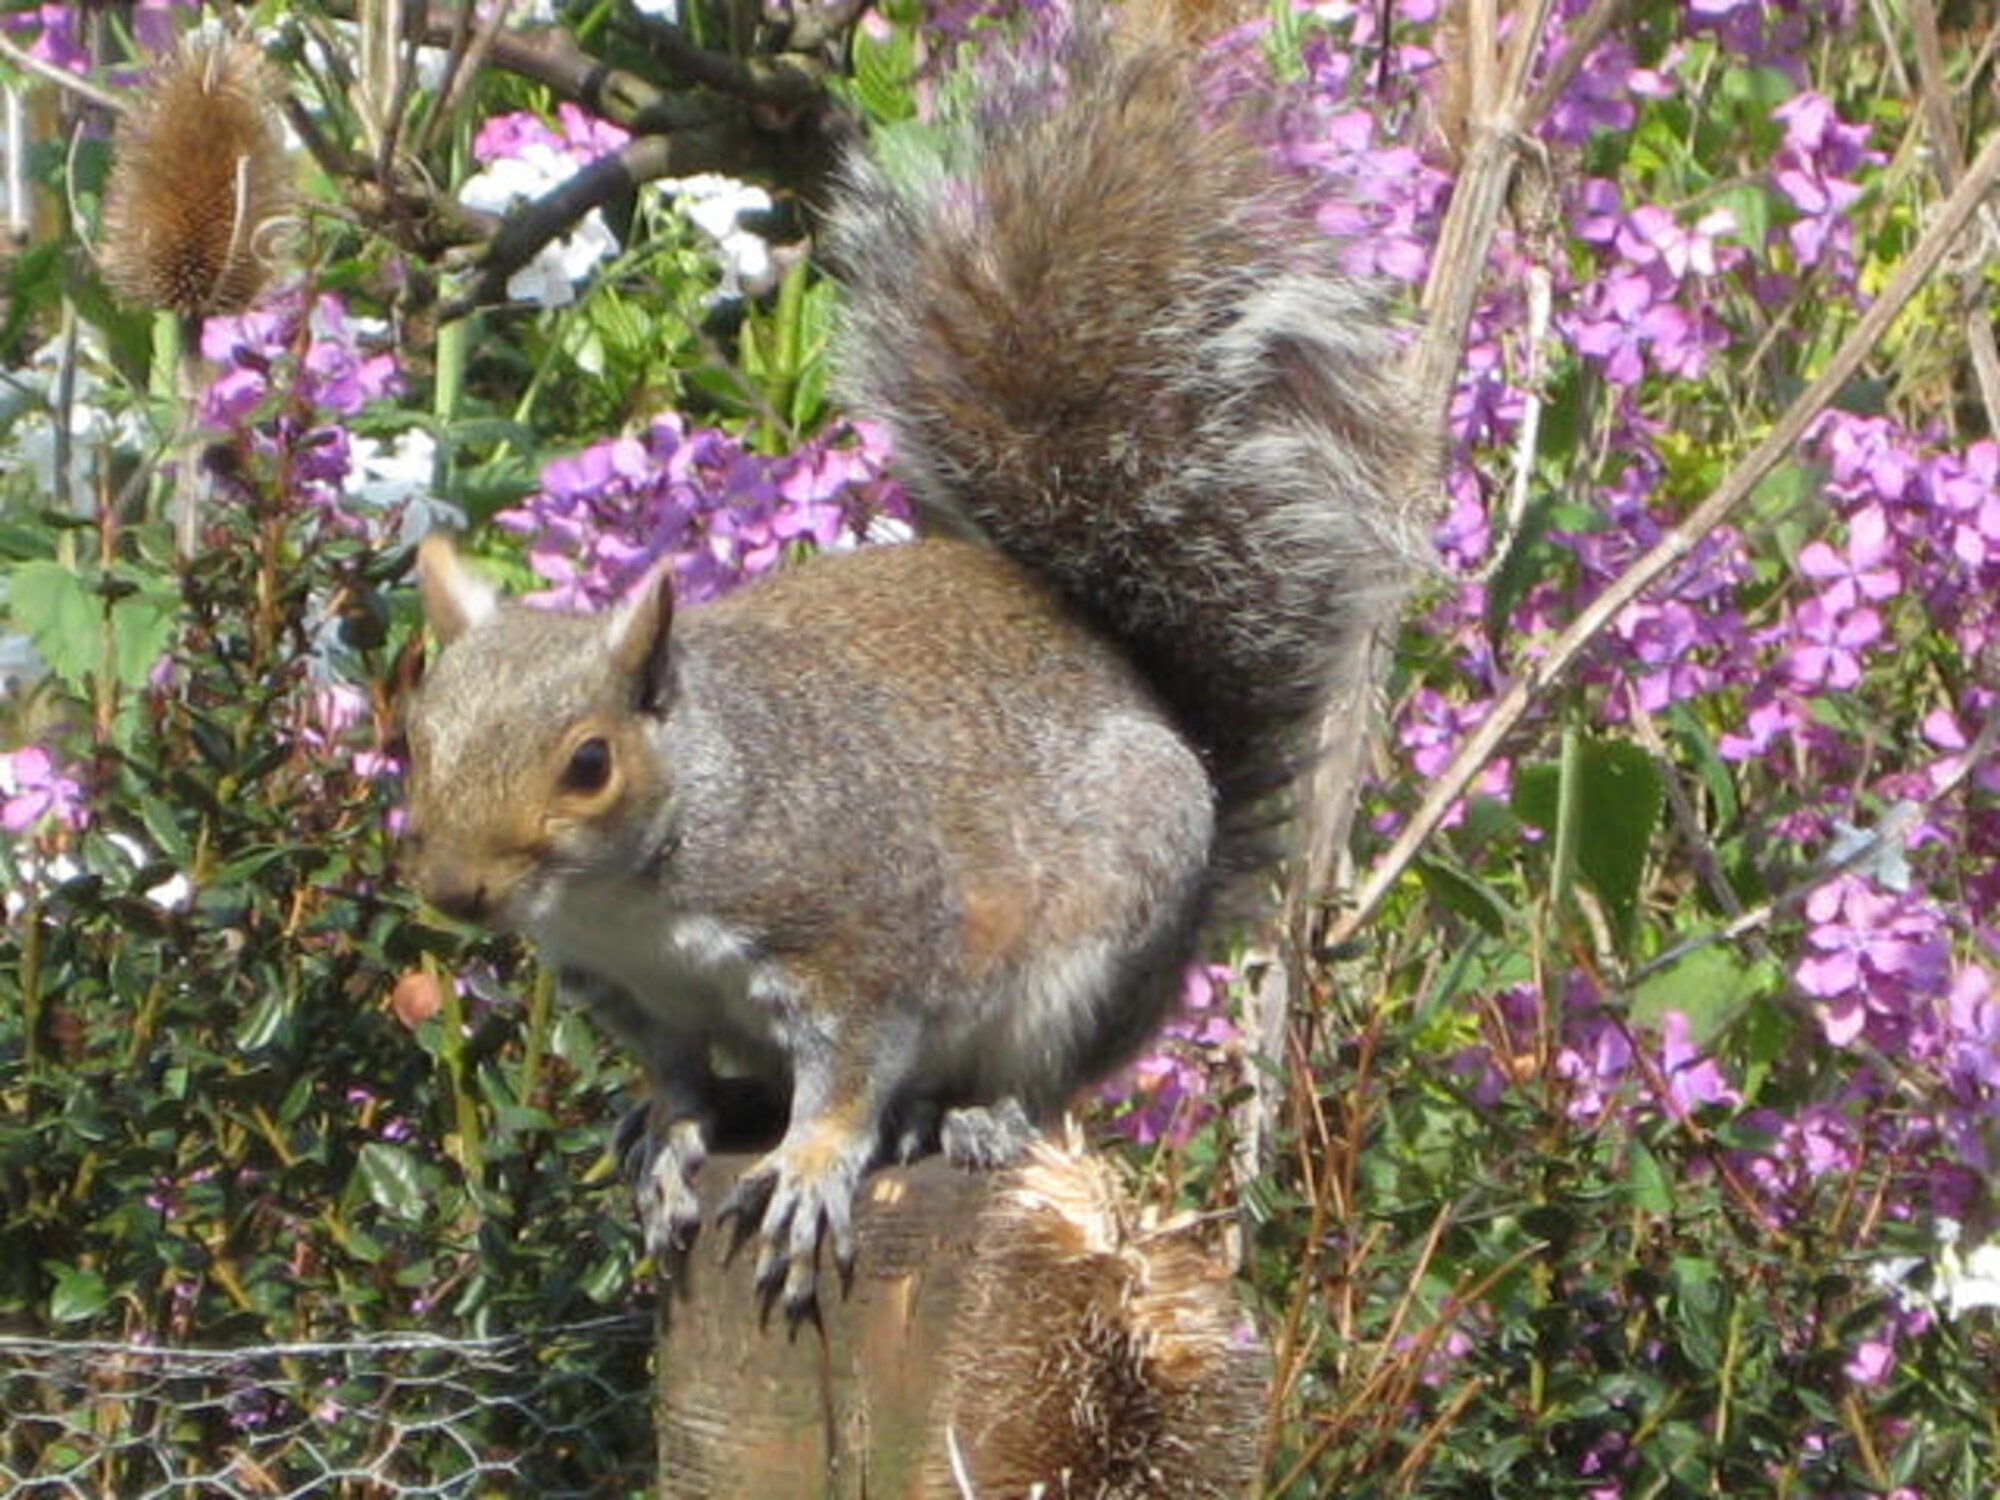 Grey squirrels are abundant in England. They are regular visitors to our garden, feasting at our bird feeders. Grey squirrels are not an indigenous species and were introduced to the U.K. from the U.S.A. in the late nineteenth/early twentieth century. Their success has been to the detriment of our native red squirrels. (Photo by Suzanne Harper)